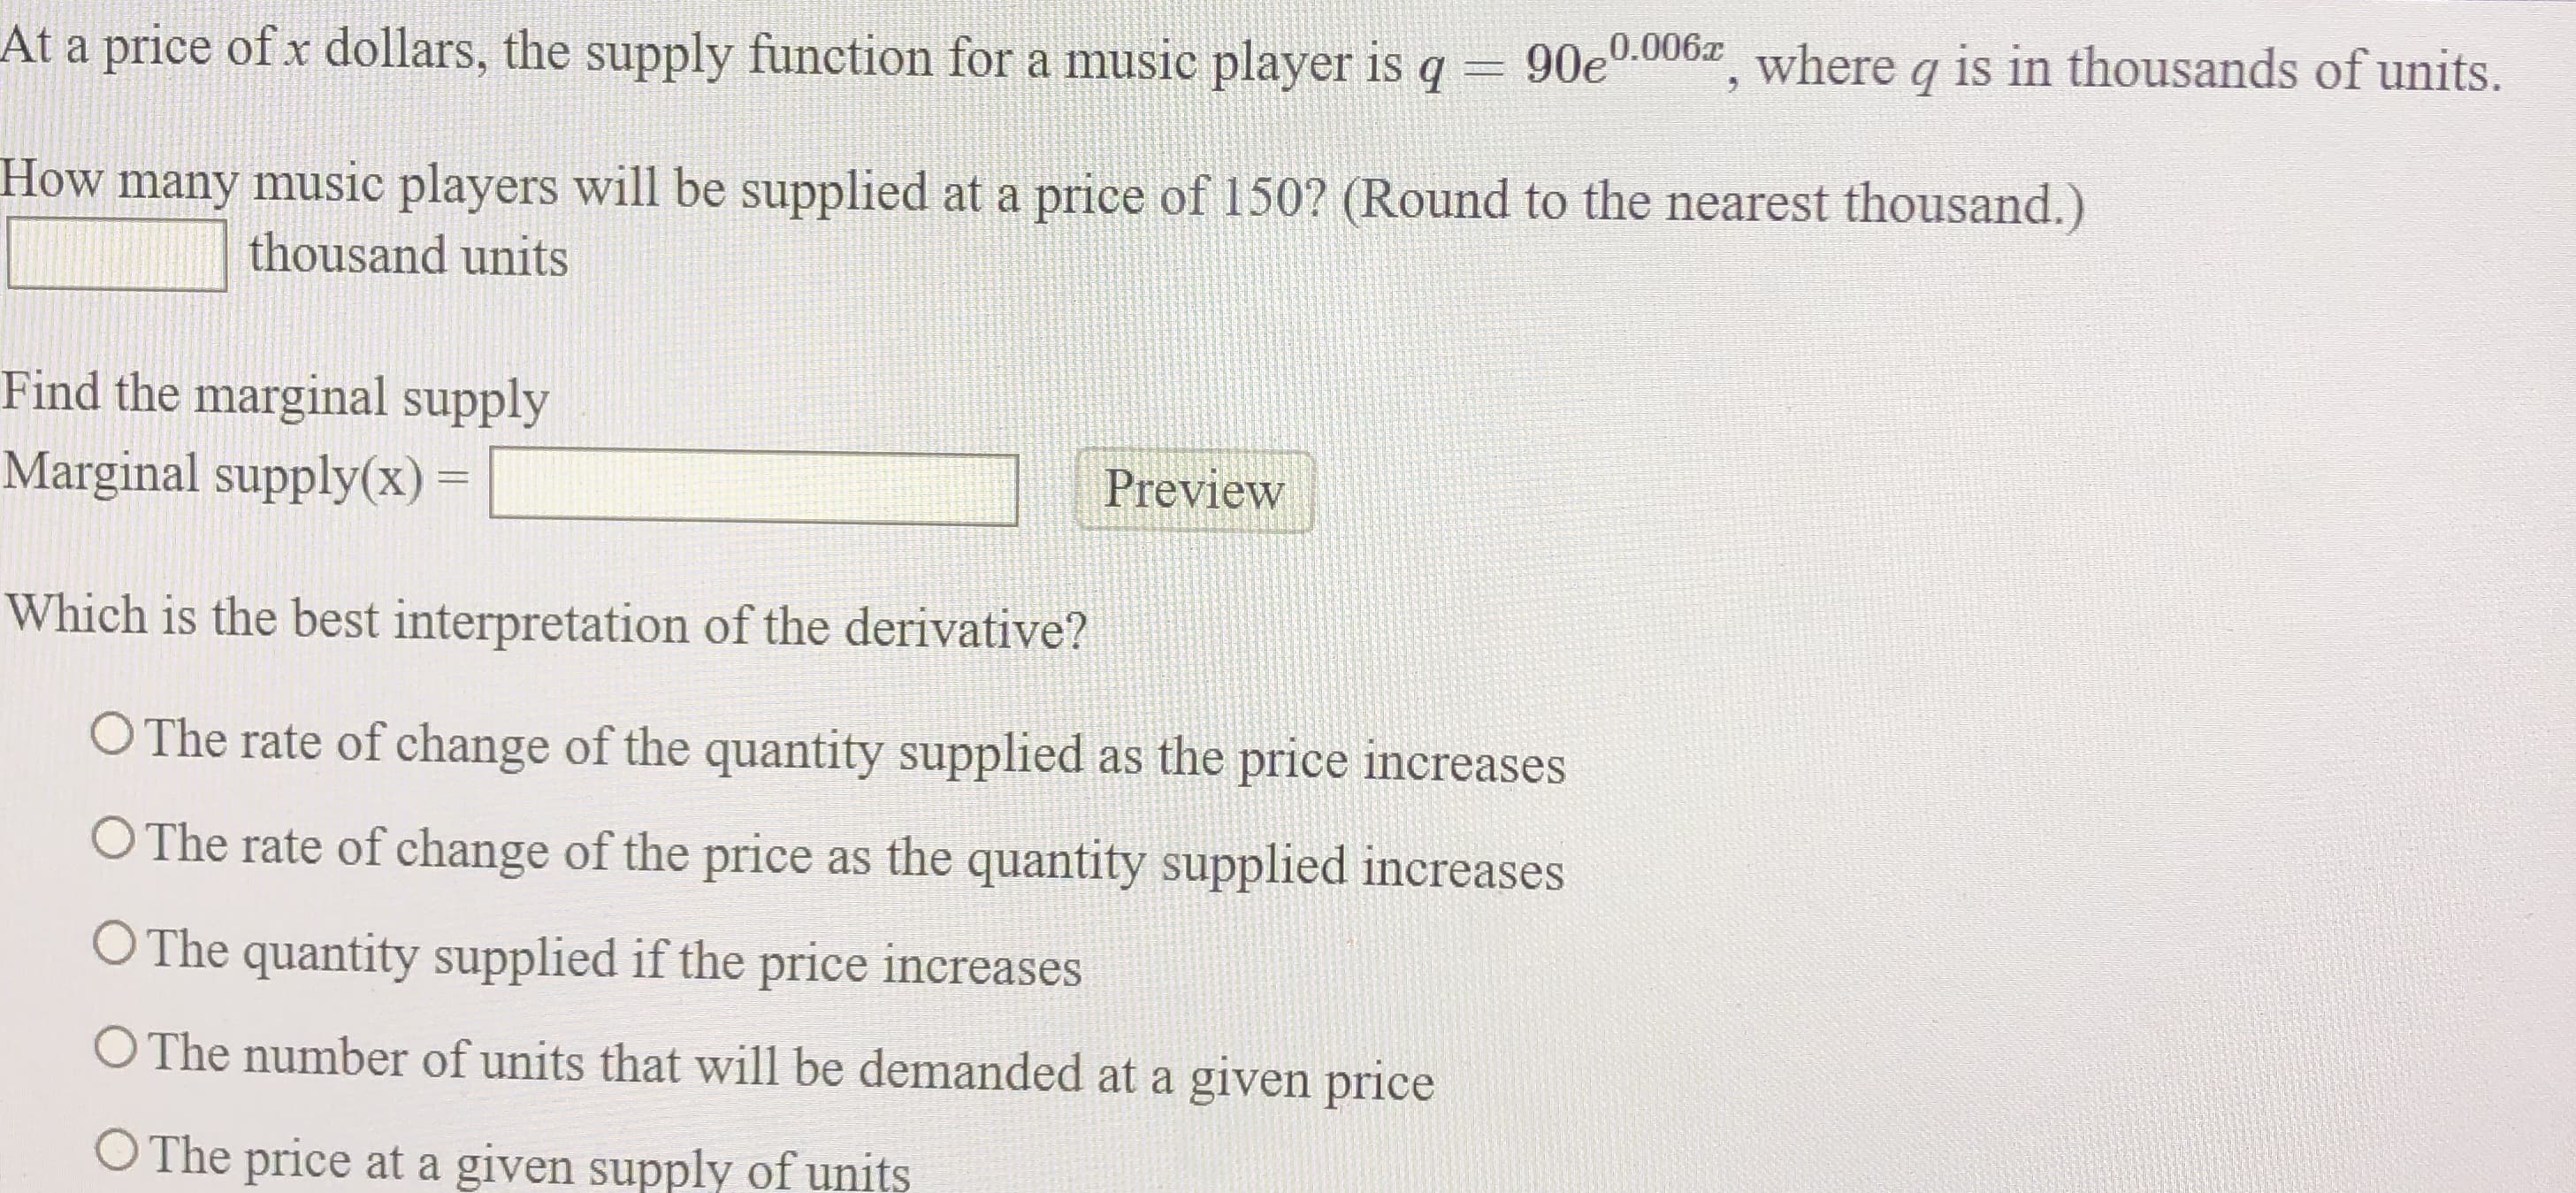 At a price of x dollars, the supply function for a music player is q = 90e0.006z where q is in thousands of units.
How many music players will be supplied at a price of 150? (Round to the nearest thousand.)
thousand units
Find the marginal supply
Marginal supply(x) =
Preview
Which is the best interpretation of the derivative?
O The rate of change of the quantity supplied as the price increases
O The rate of change of the price as the quantity supplied increases
O The quantity supplied if the price increases
O The number of units that will be demanded at a given price
O The price at a given supply of units
